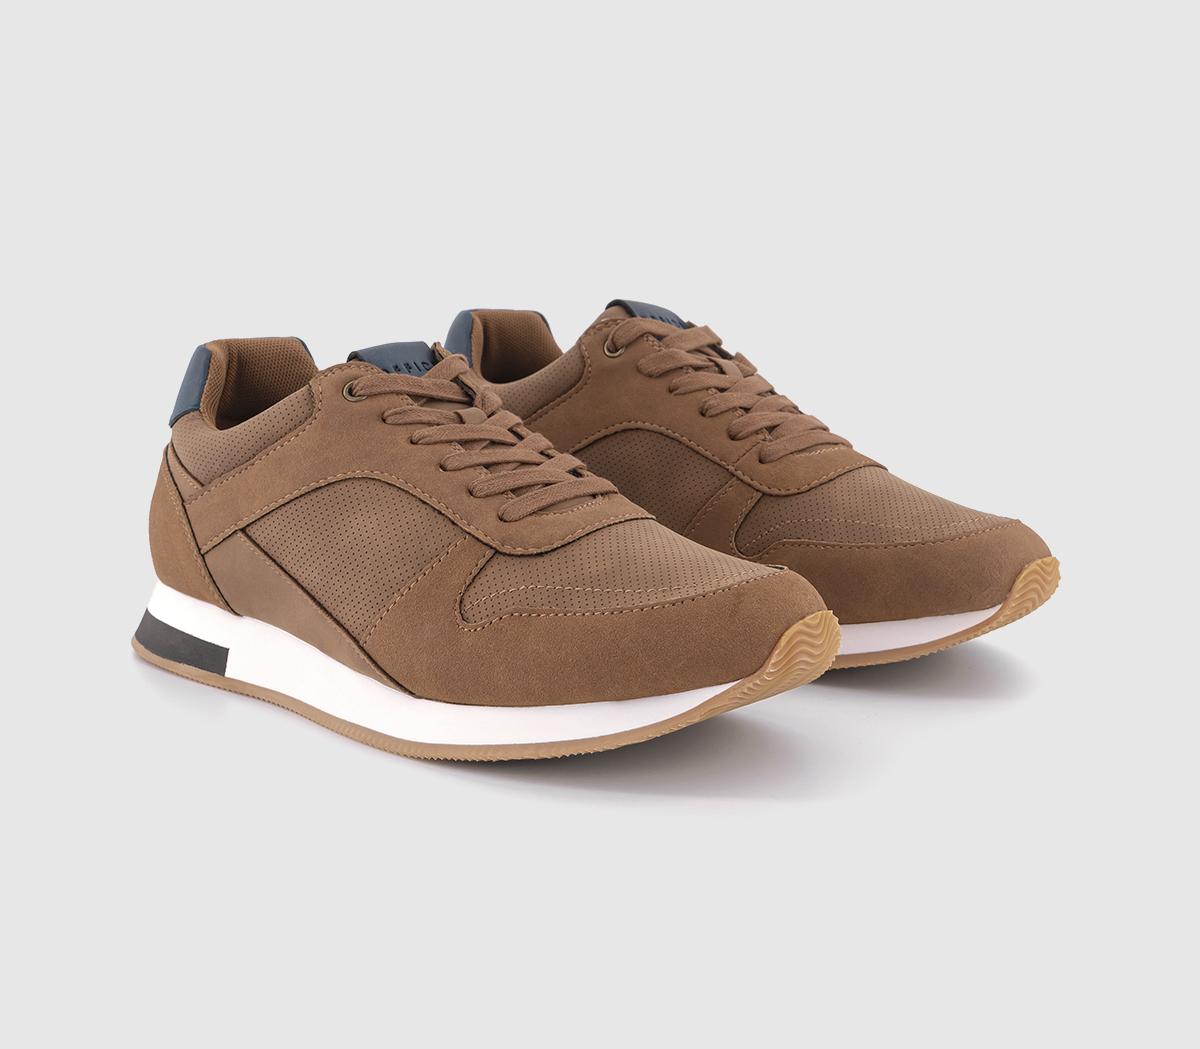 OFFICE Mens Cassidy Lightweight Trainers Tan, 10